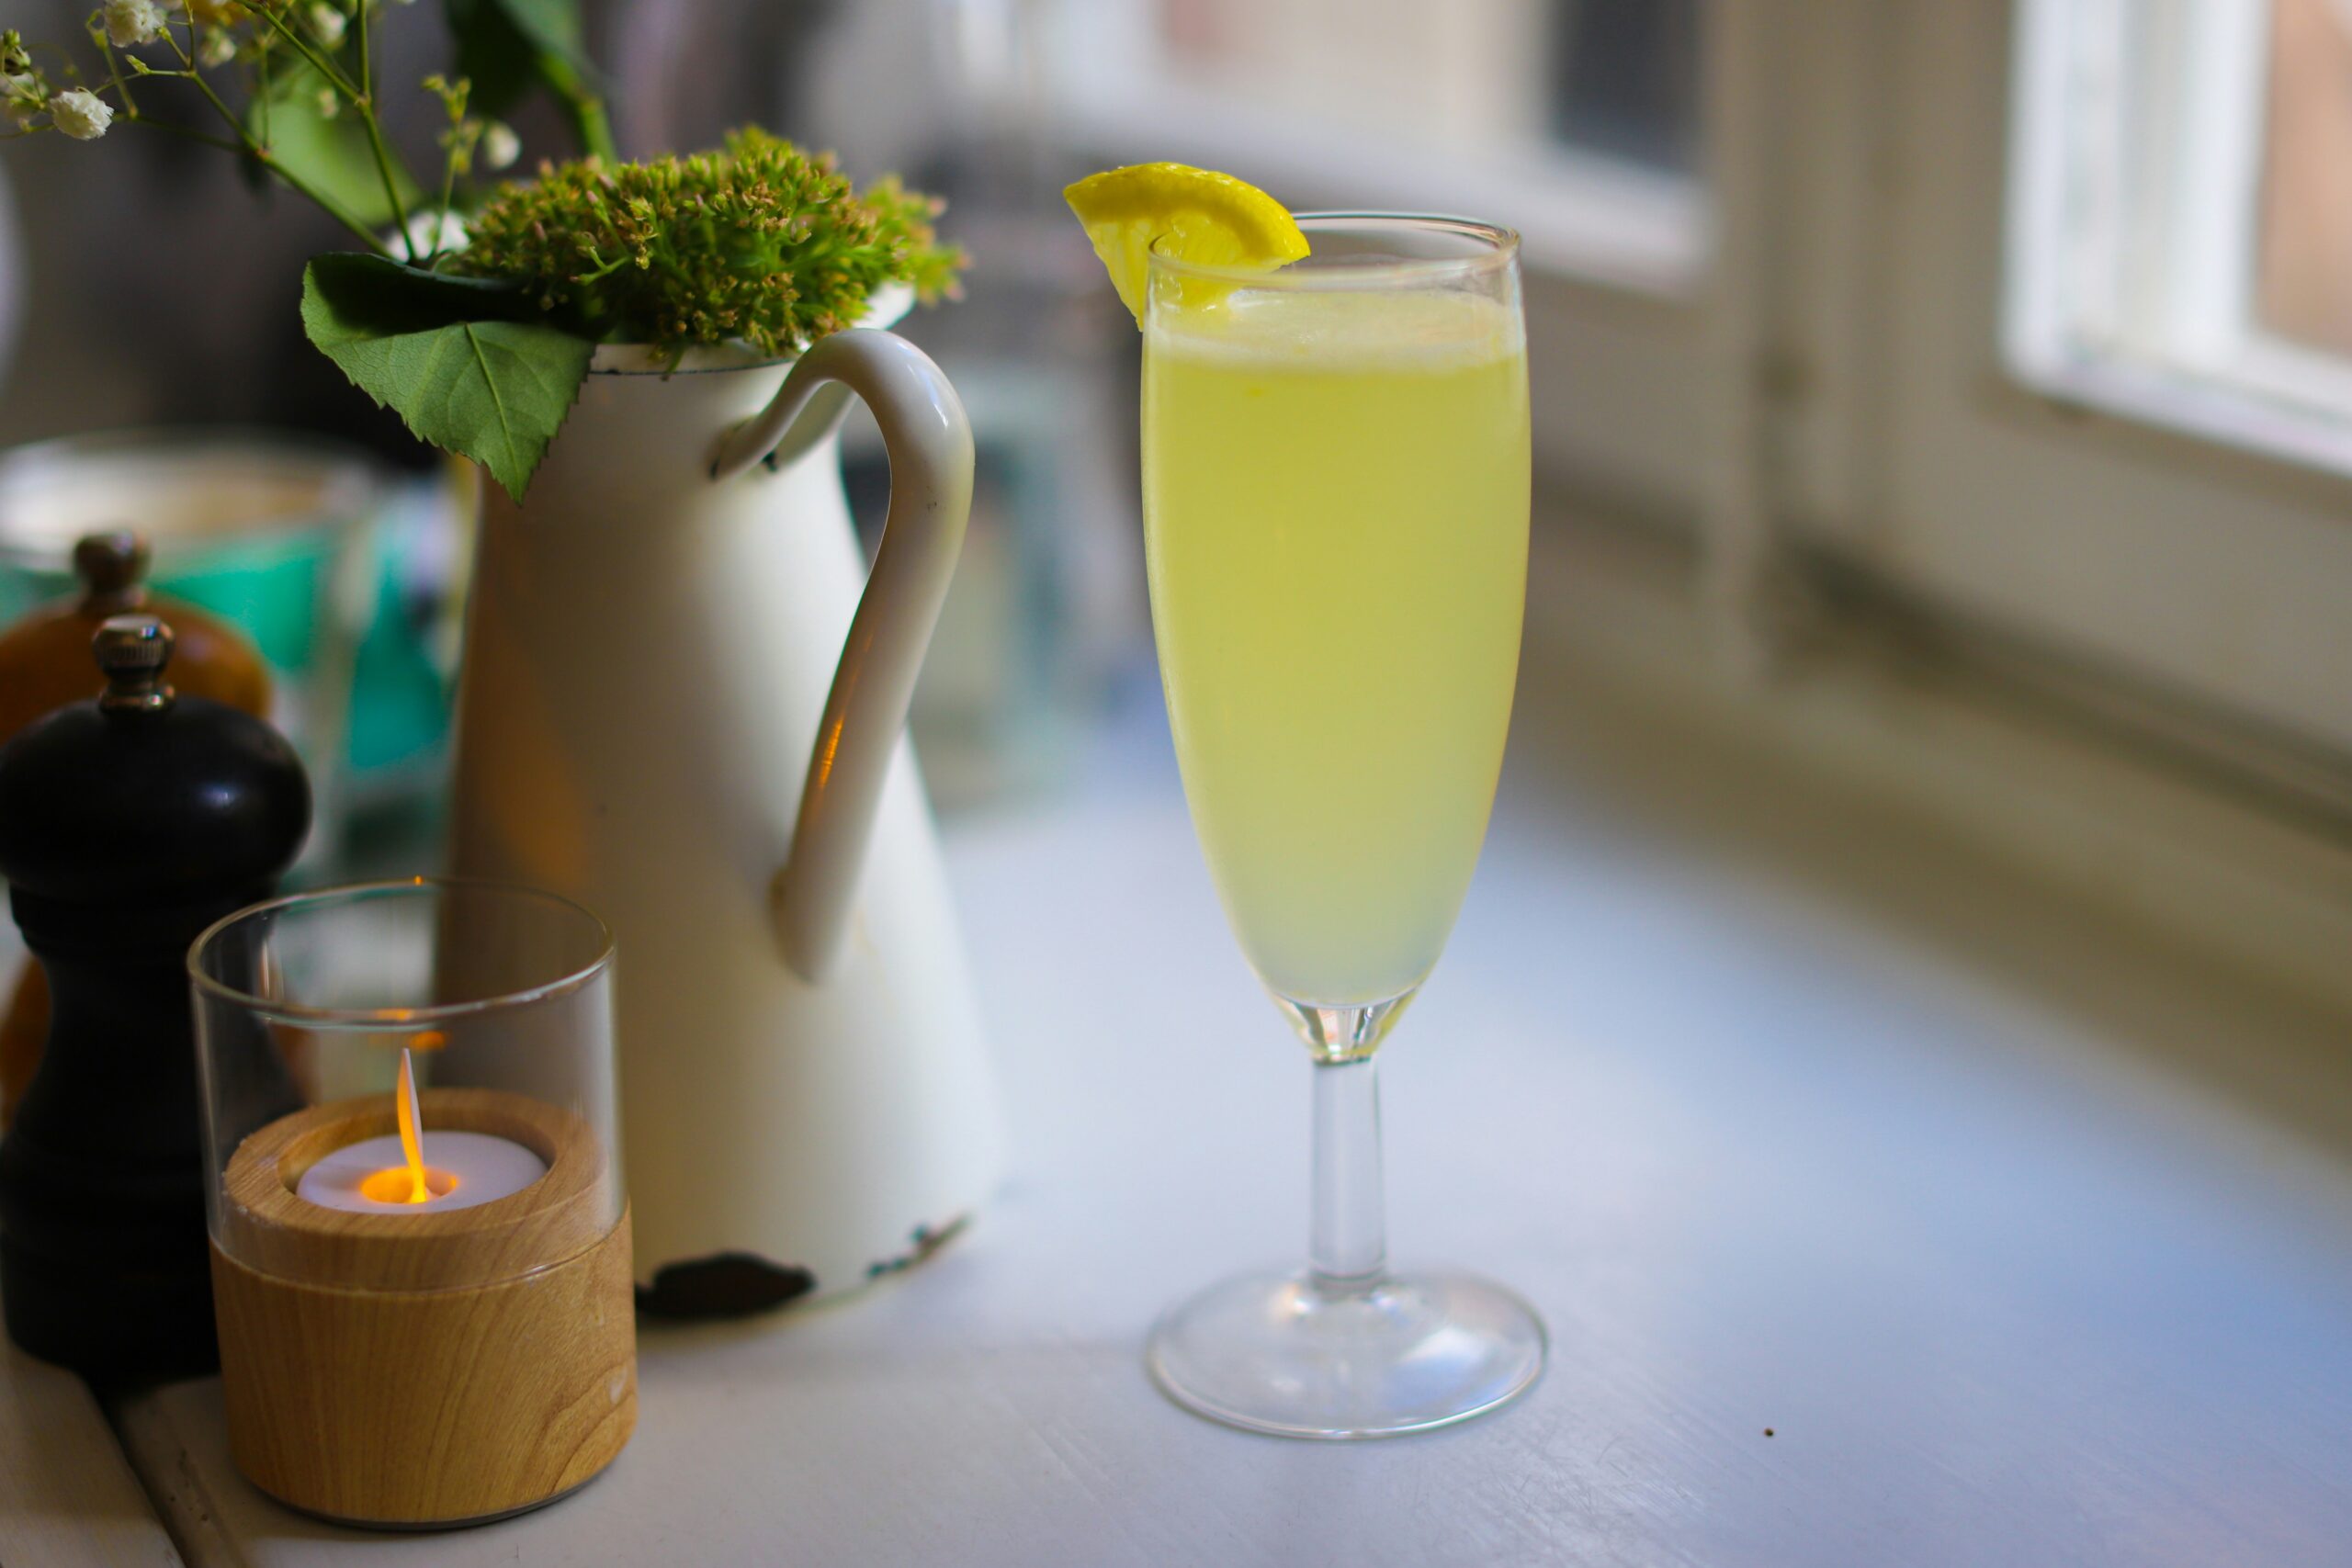 With just a few ingredients, this guide shows you how to make a french 75 cocktail. Pictured: A champagne cocktail